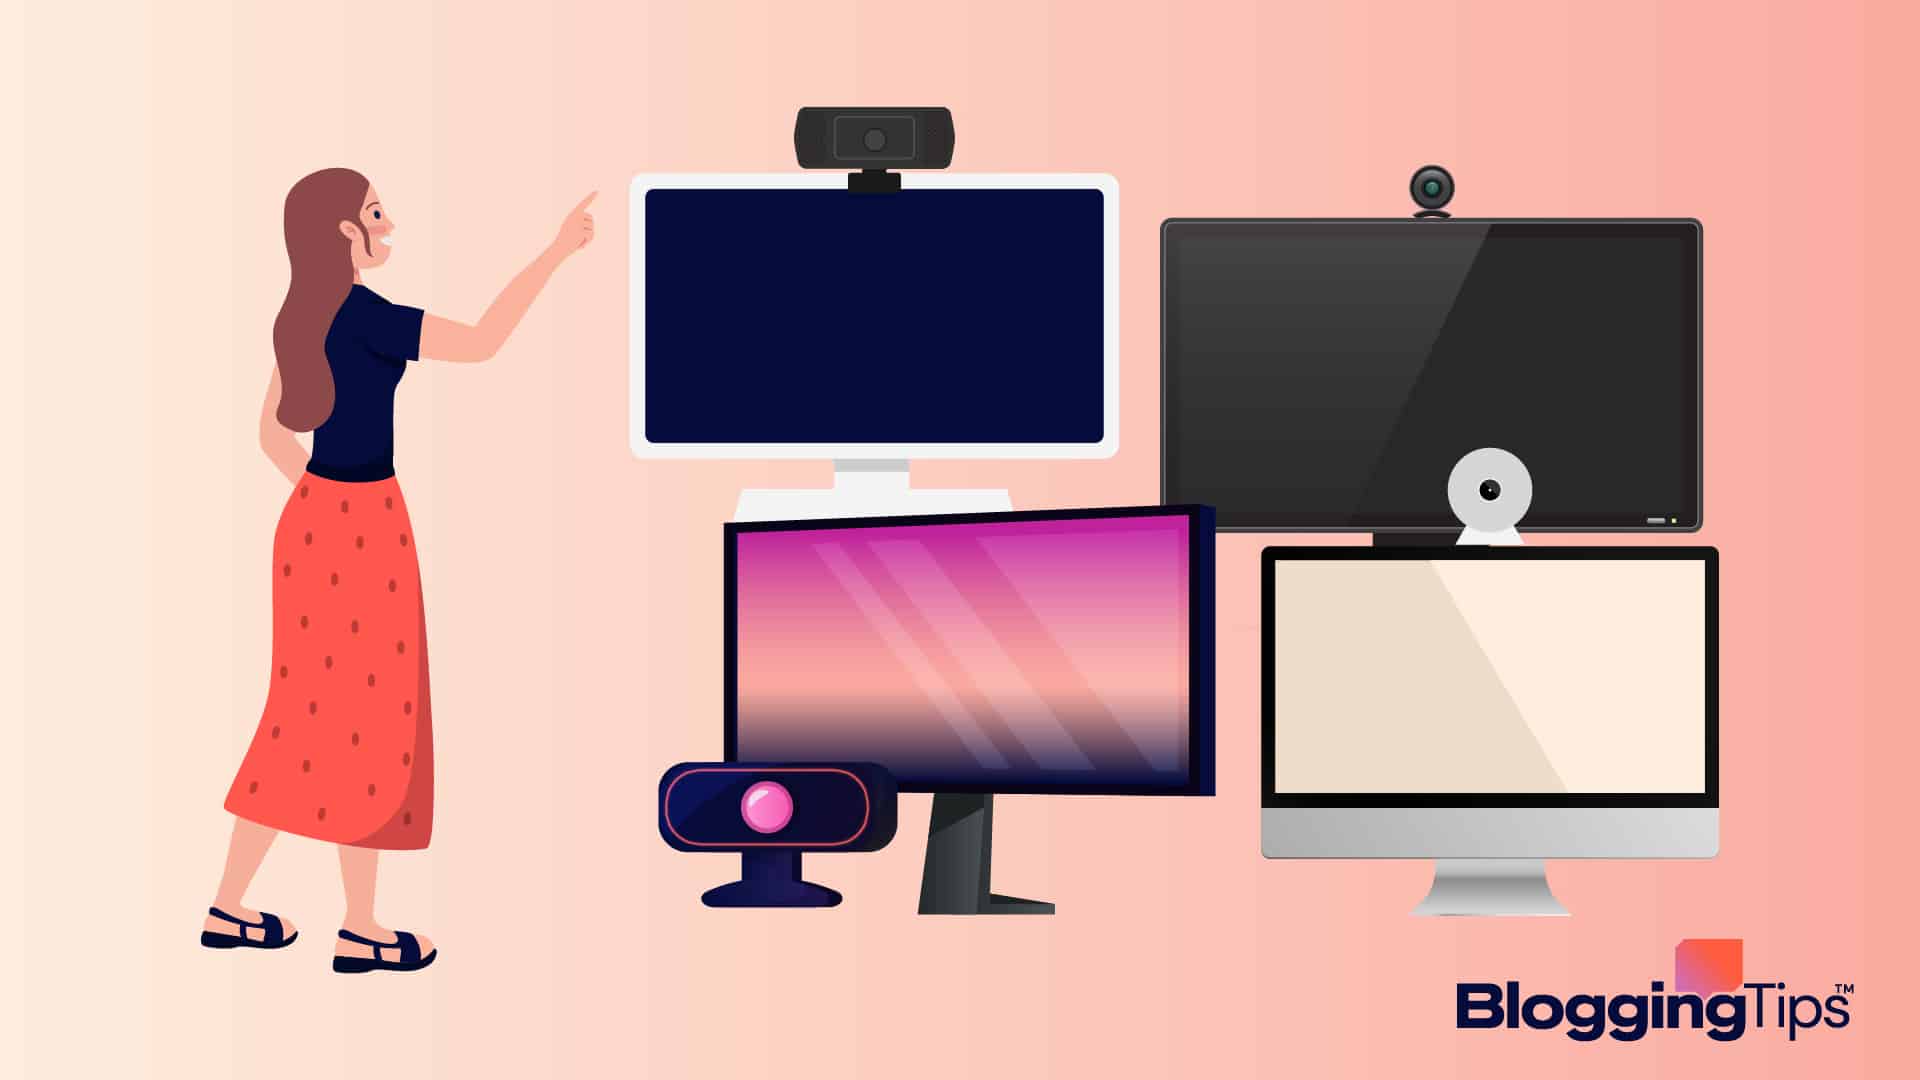 vector graphic showing an illustration of a woman learning to monitor with a webcam